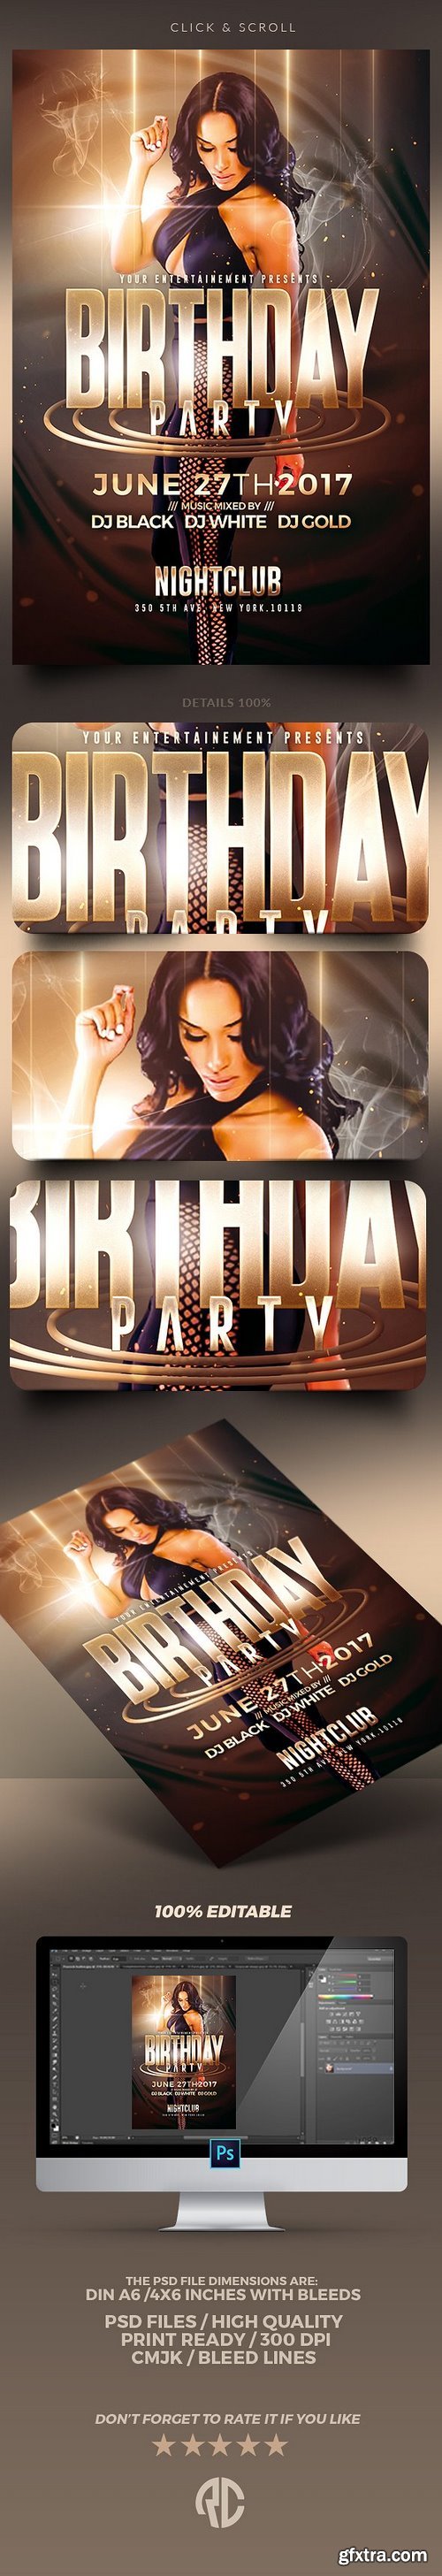 CM - Birthday Party - Flyer Template 1392350